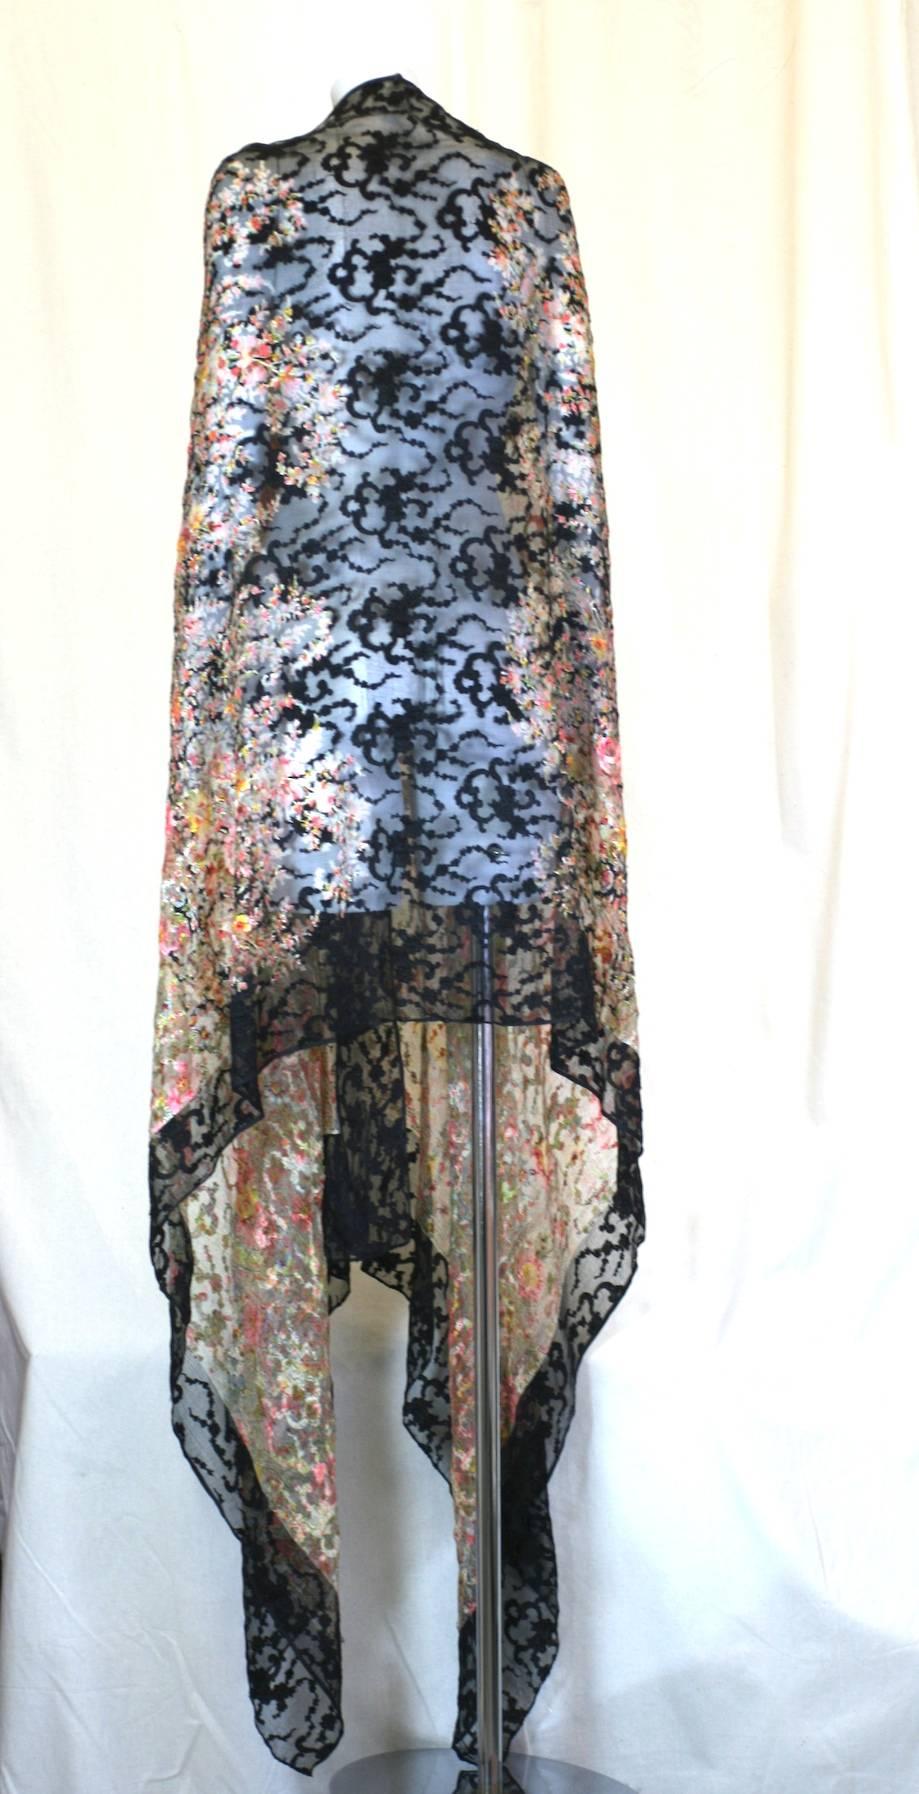 Rare, Aesthetic Liberty of London damask chiffon souffle printed shawl from the early 20th century. This varicolored muted shawl features exotic Persian style motifs, printed and brocaded on a ground of sheer ivory and black silk chiffon souffle.